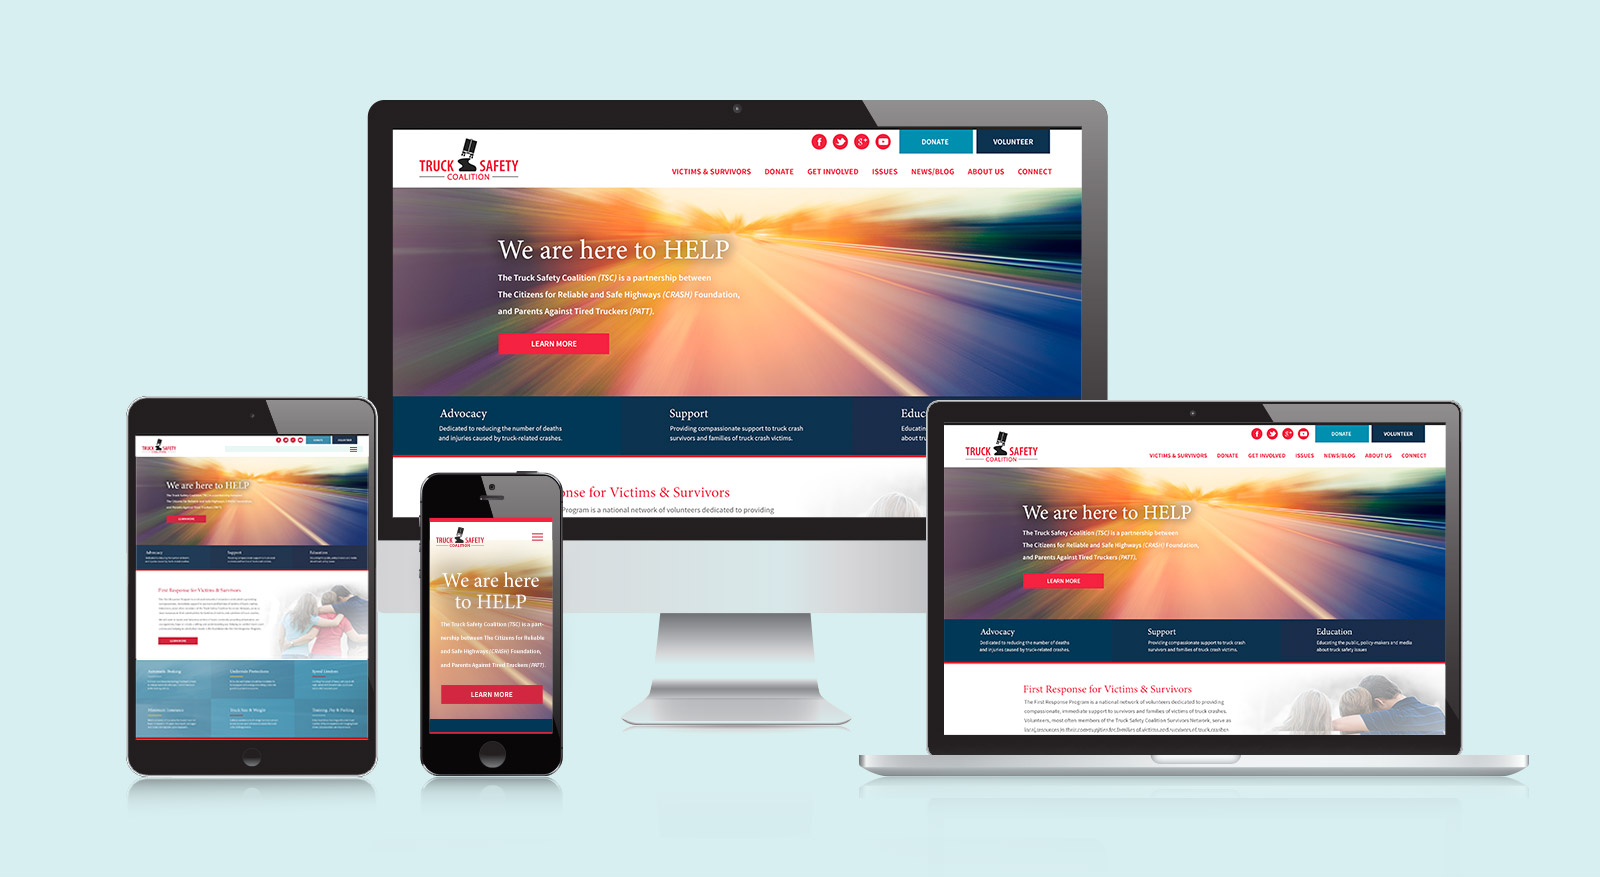 The Truck Safety Coalition website design responsively displayed on multiple devices